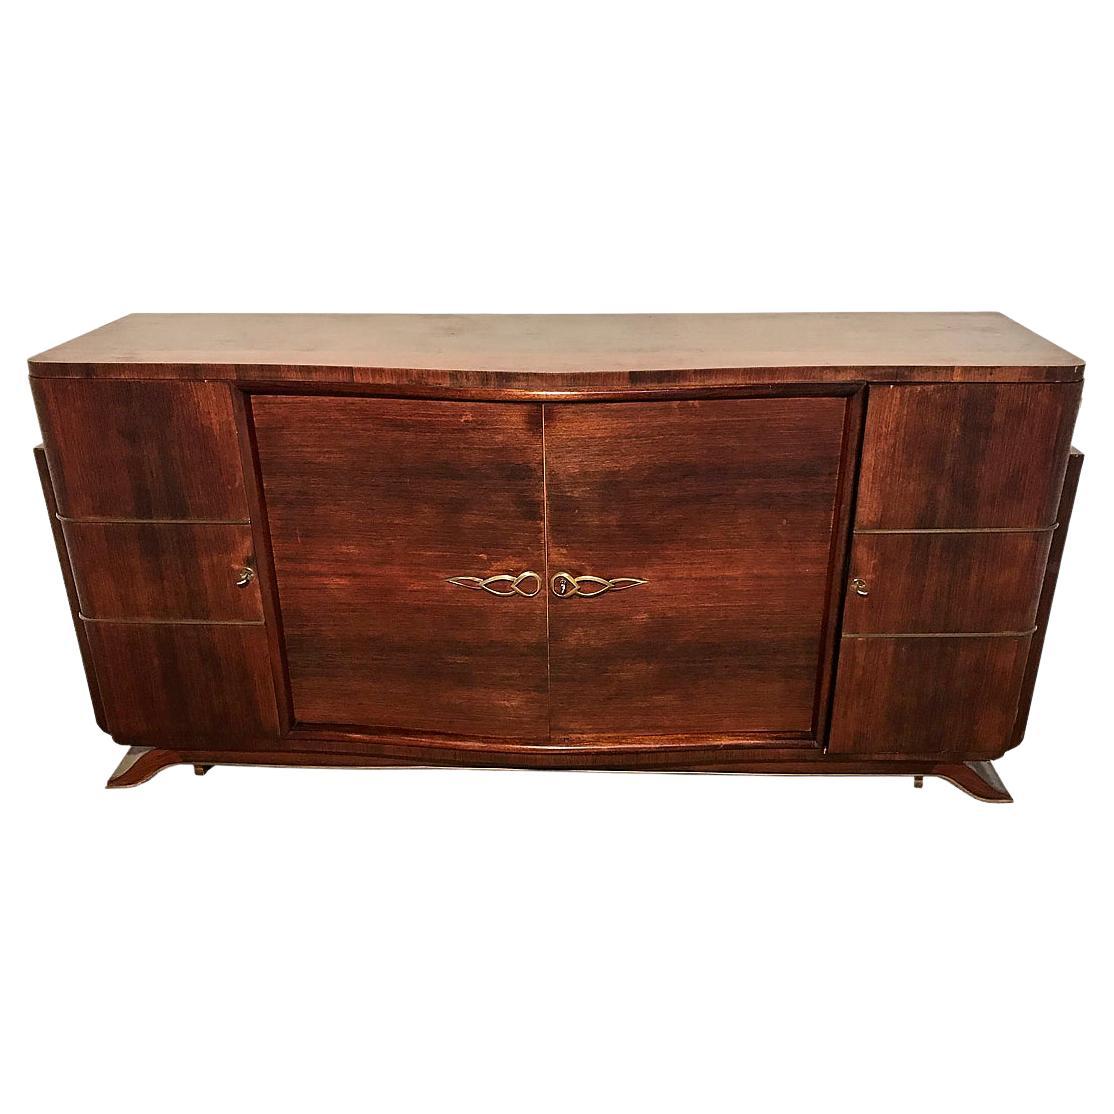 Art Deco Sideboard with Fine Rosewood Veneer and Brass Strips from Paris, 1925